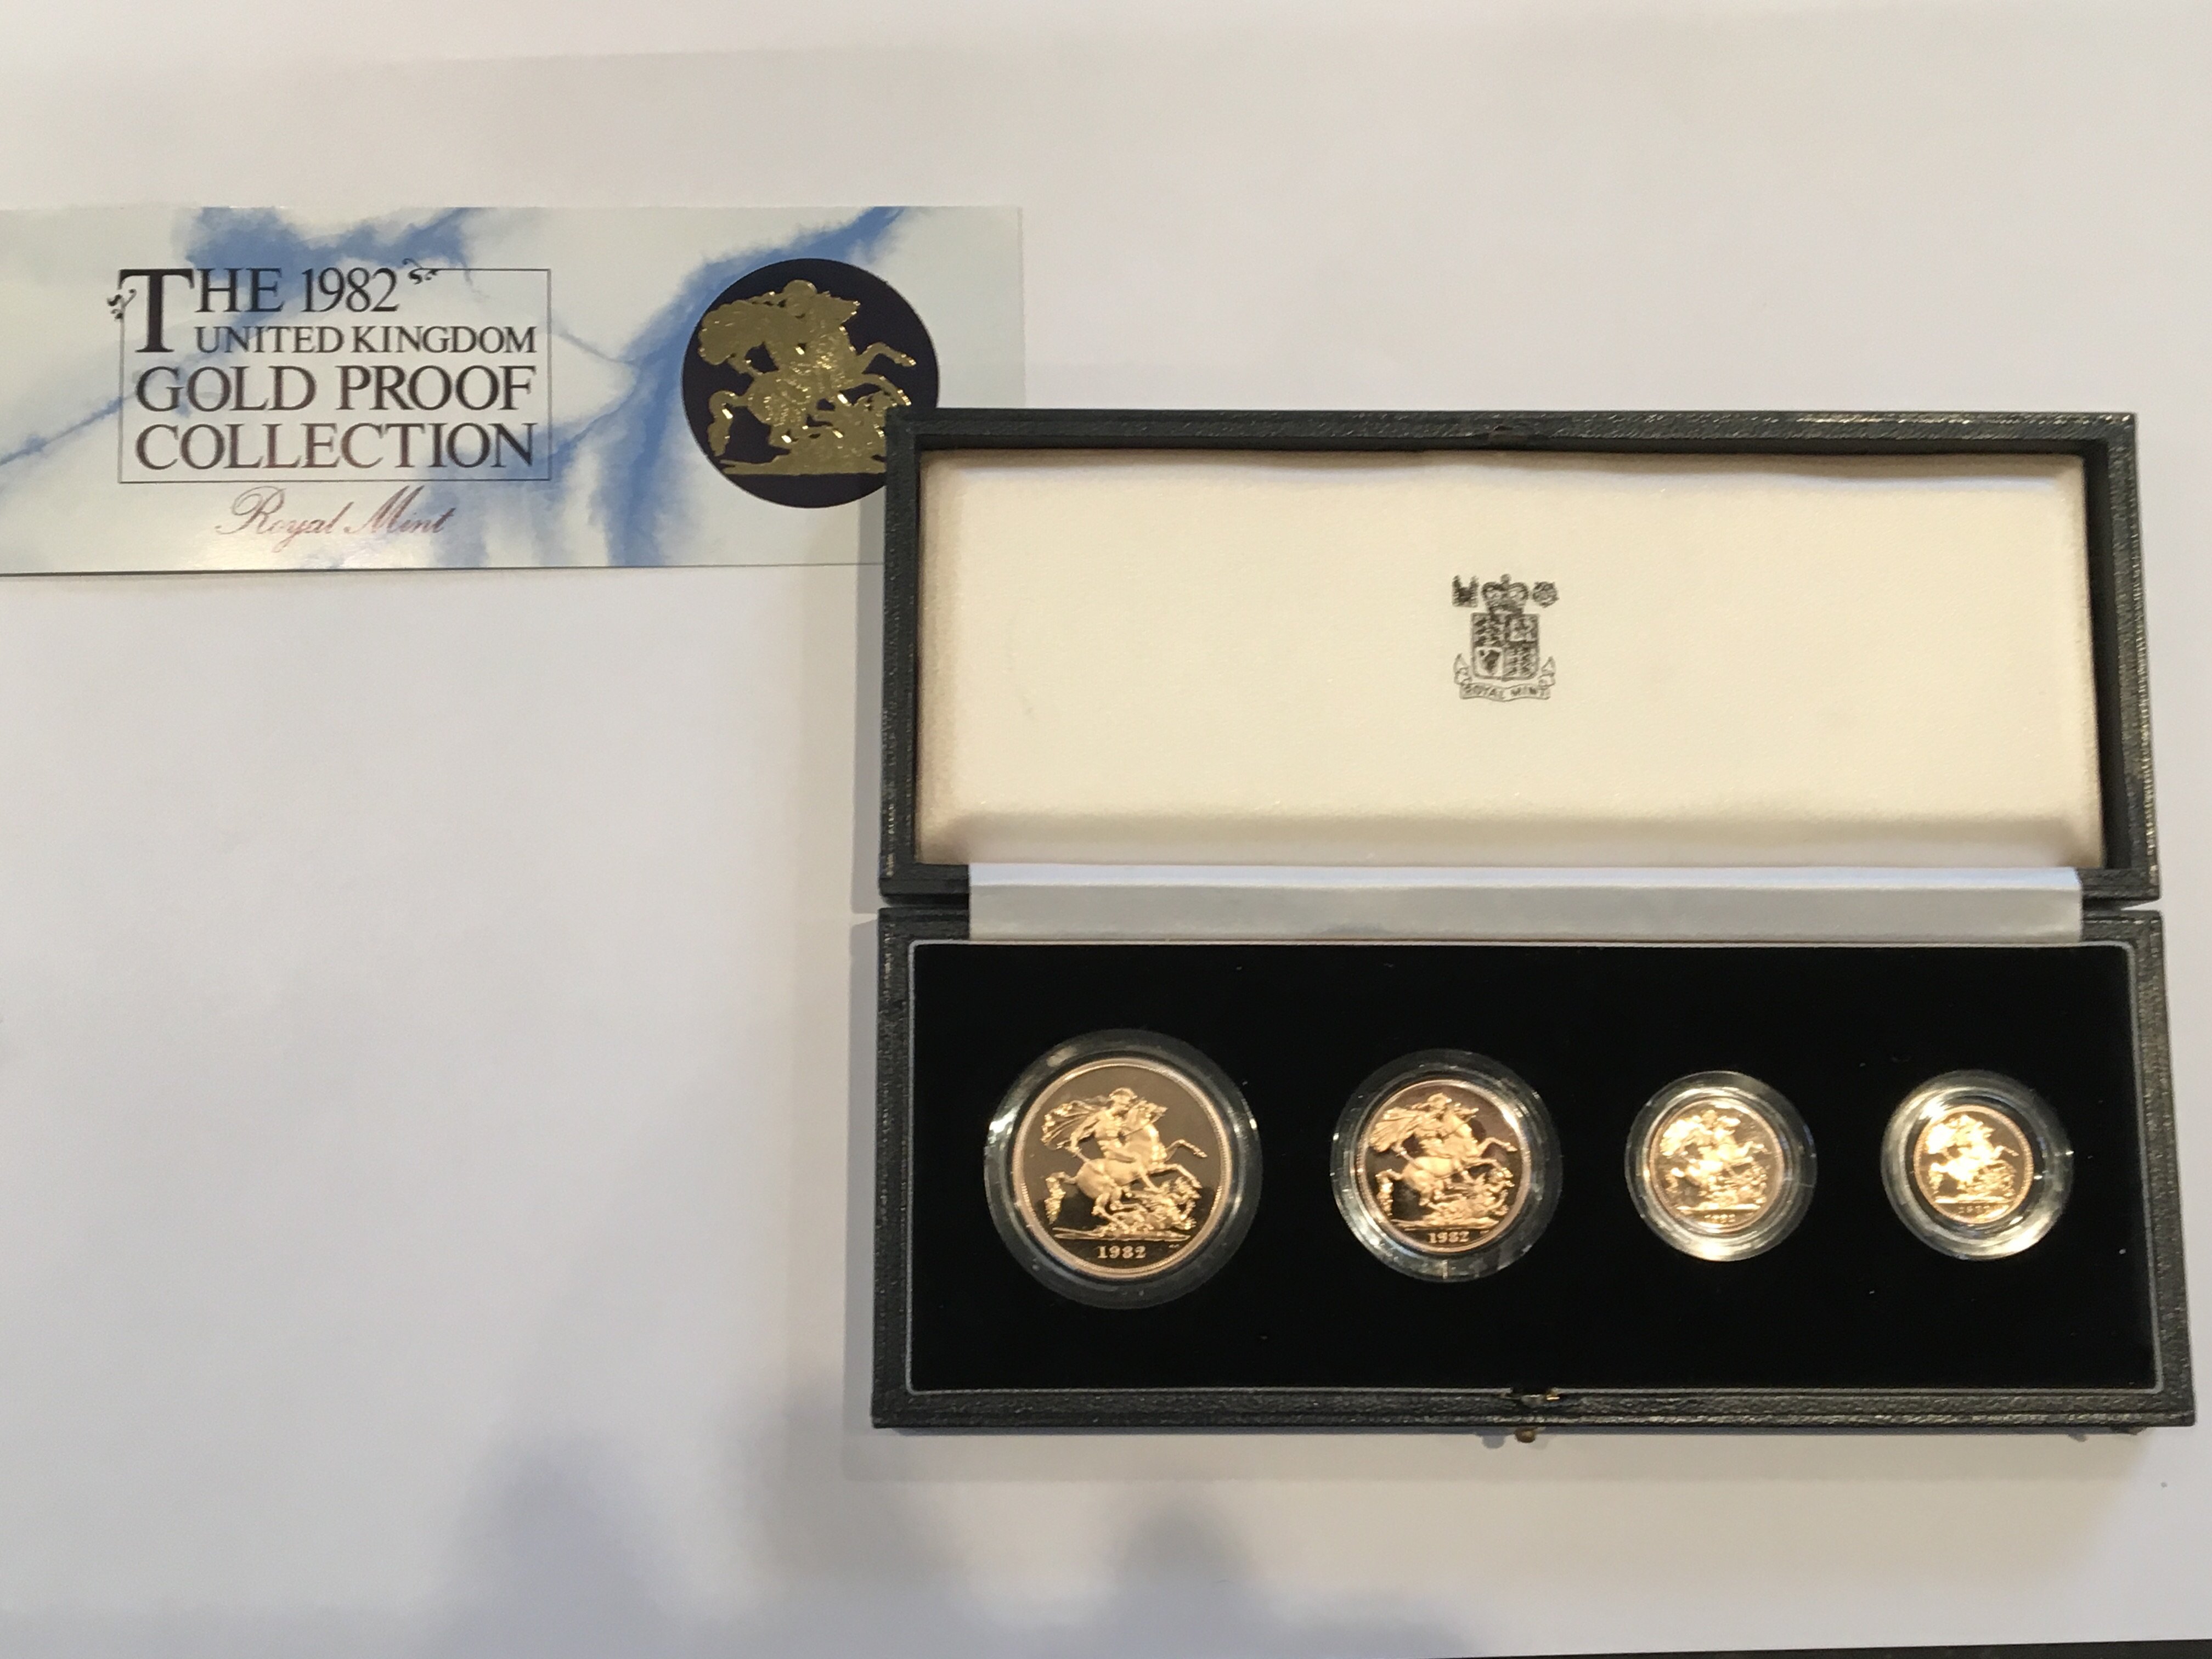 The 1982 United Kingdom Gold Proof Collection from